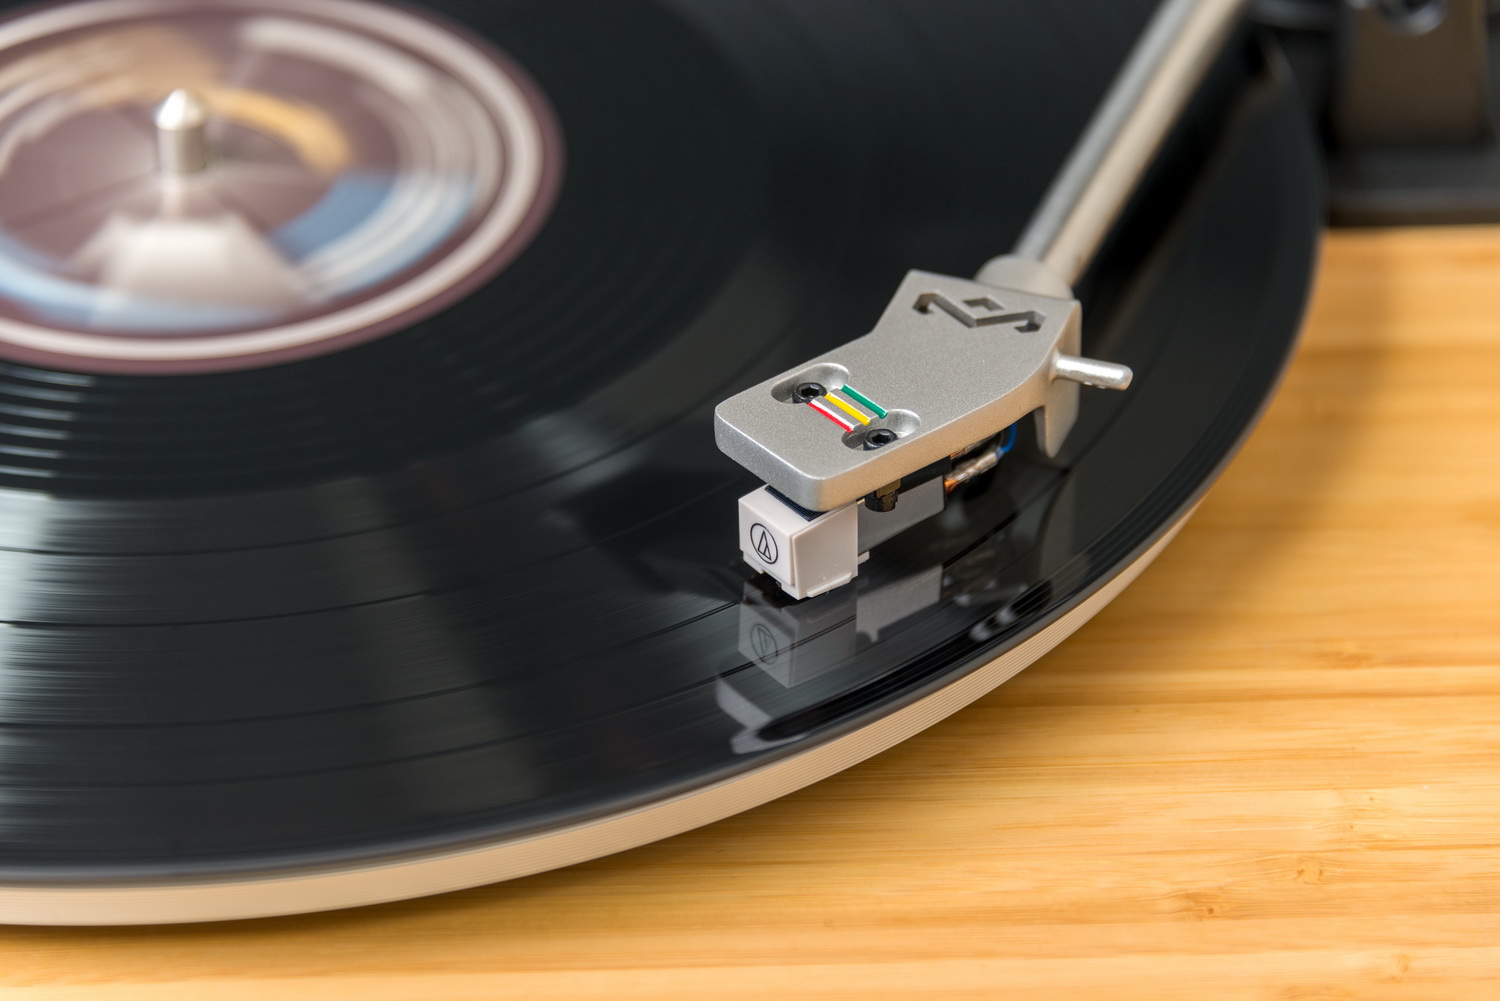 House of Marley Stir it Up wireless turntable review - Great design, great  sound, but why hide it? - The Gadgeteer